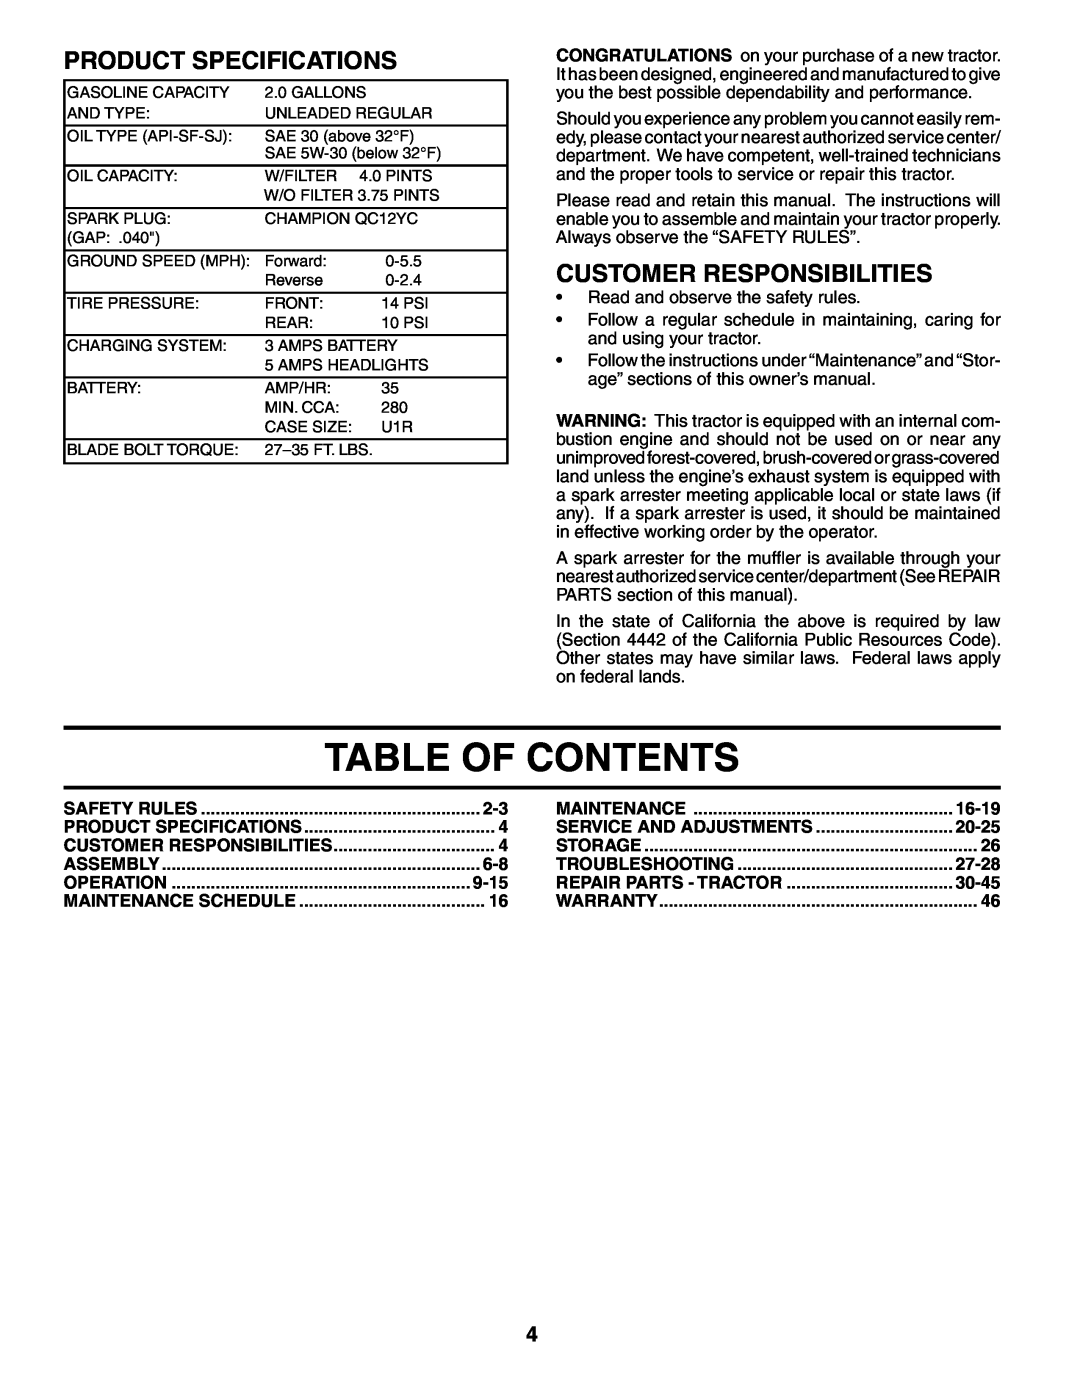 Poulan PD20H42STA owner manual Table Of Contents, Product Specifications, Customer Responsibilities 